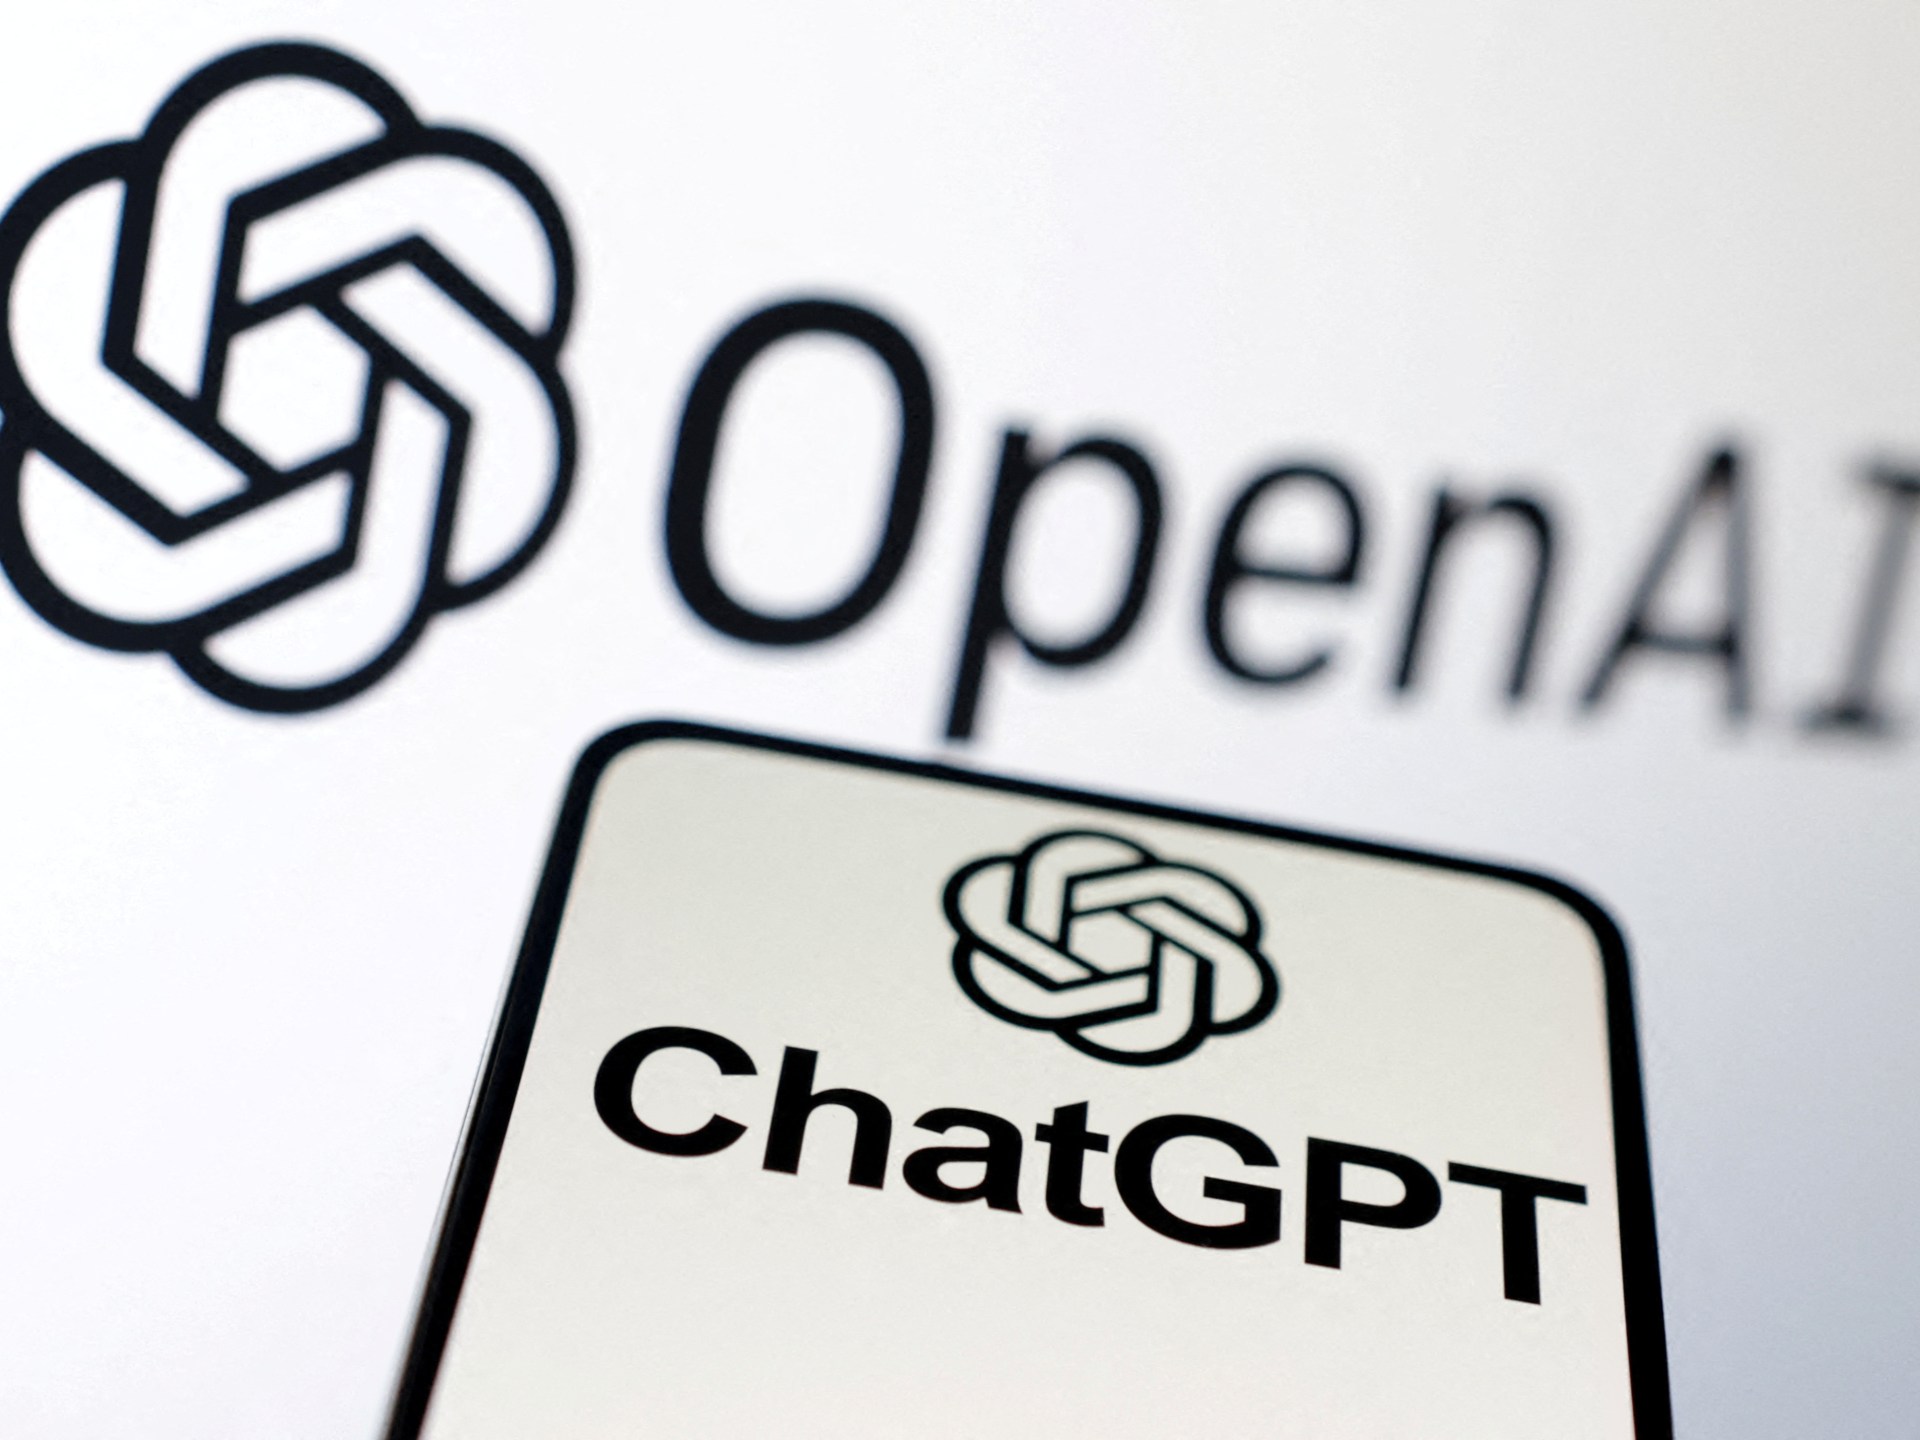 ChatGPT owner OpenAI says it has fixed a bug that caused a “significant issue” of a small set of users being able to see the titles of others’ c